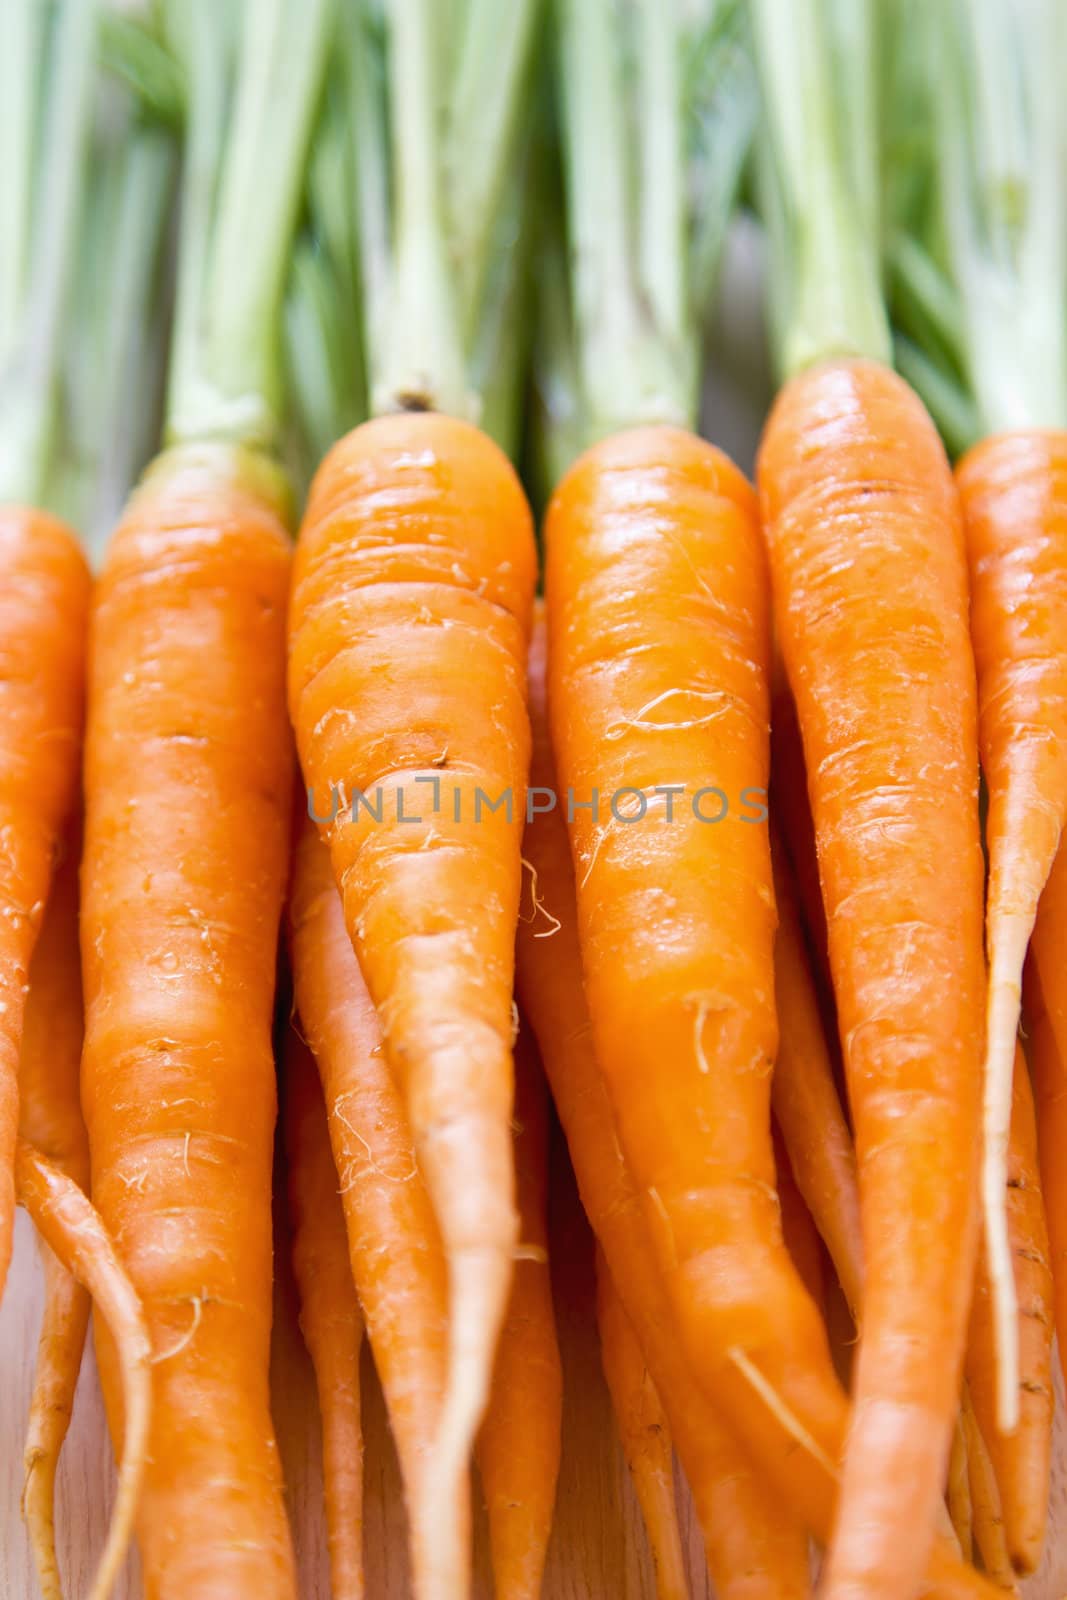 Closed up fresh Baby carrot